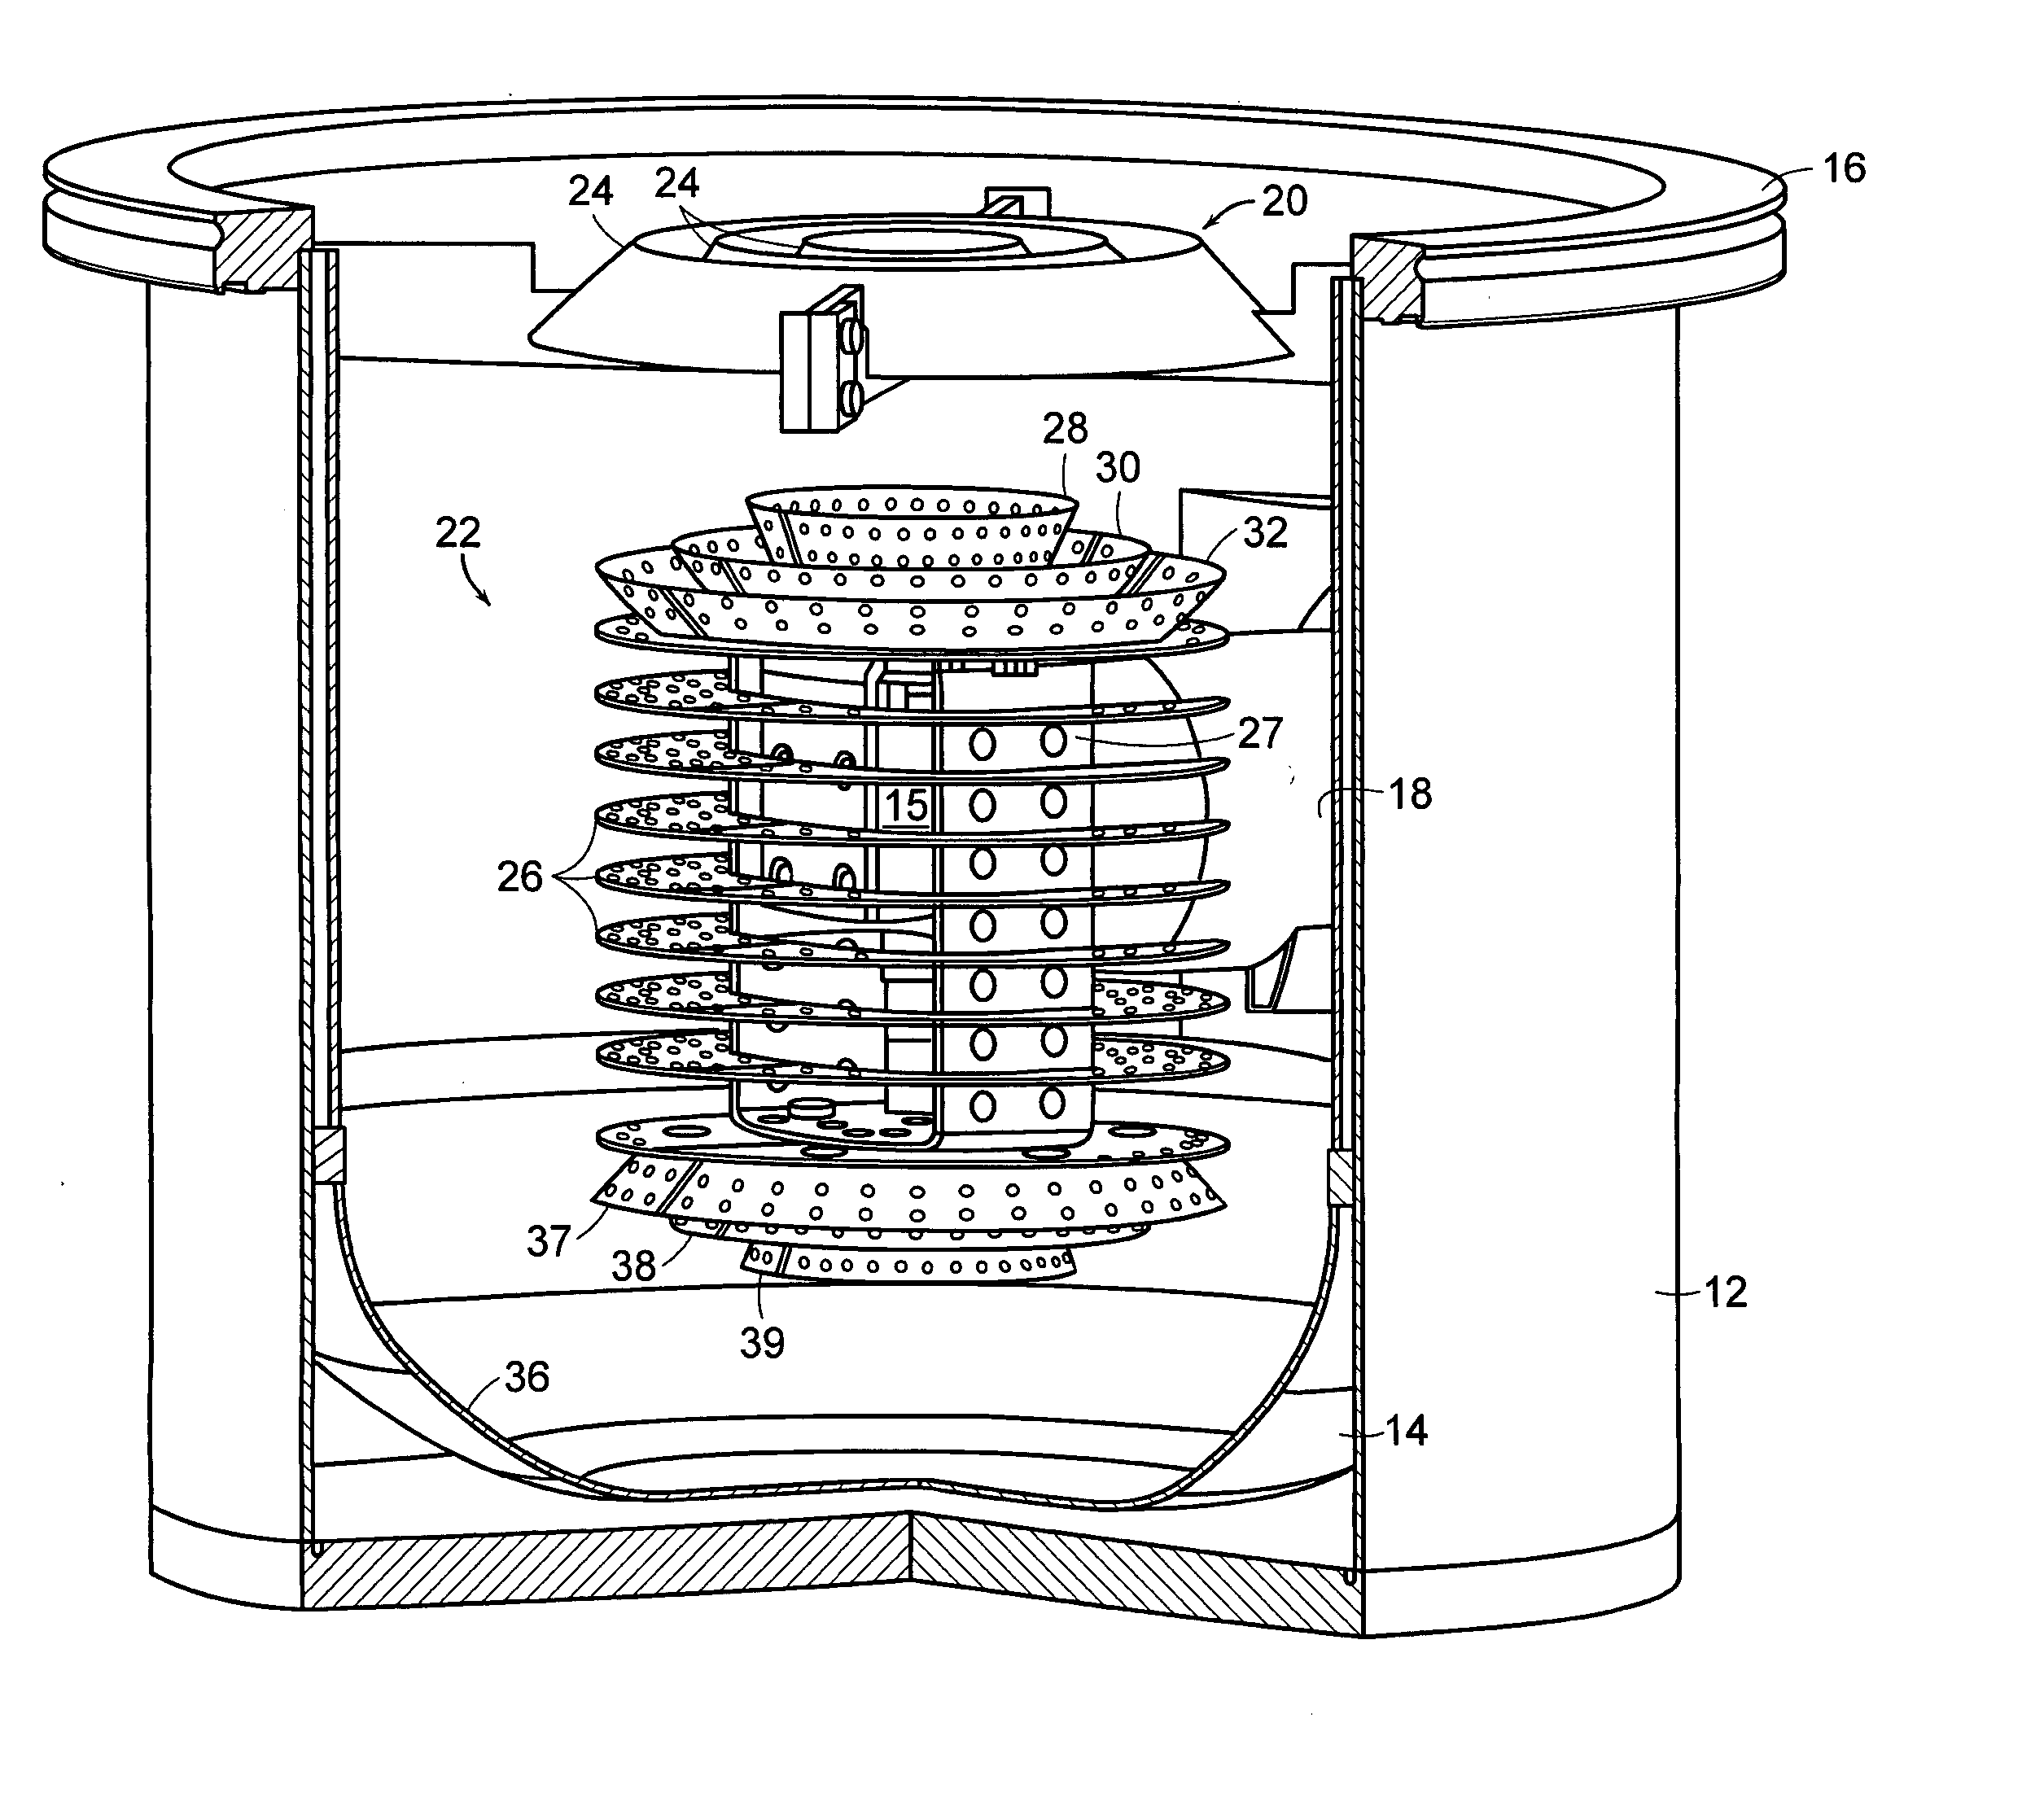 High conductance cryopump for type III gas pumping